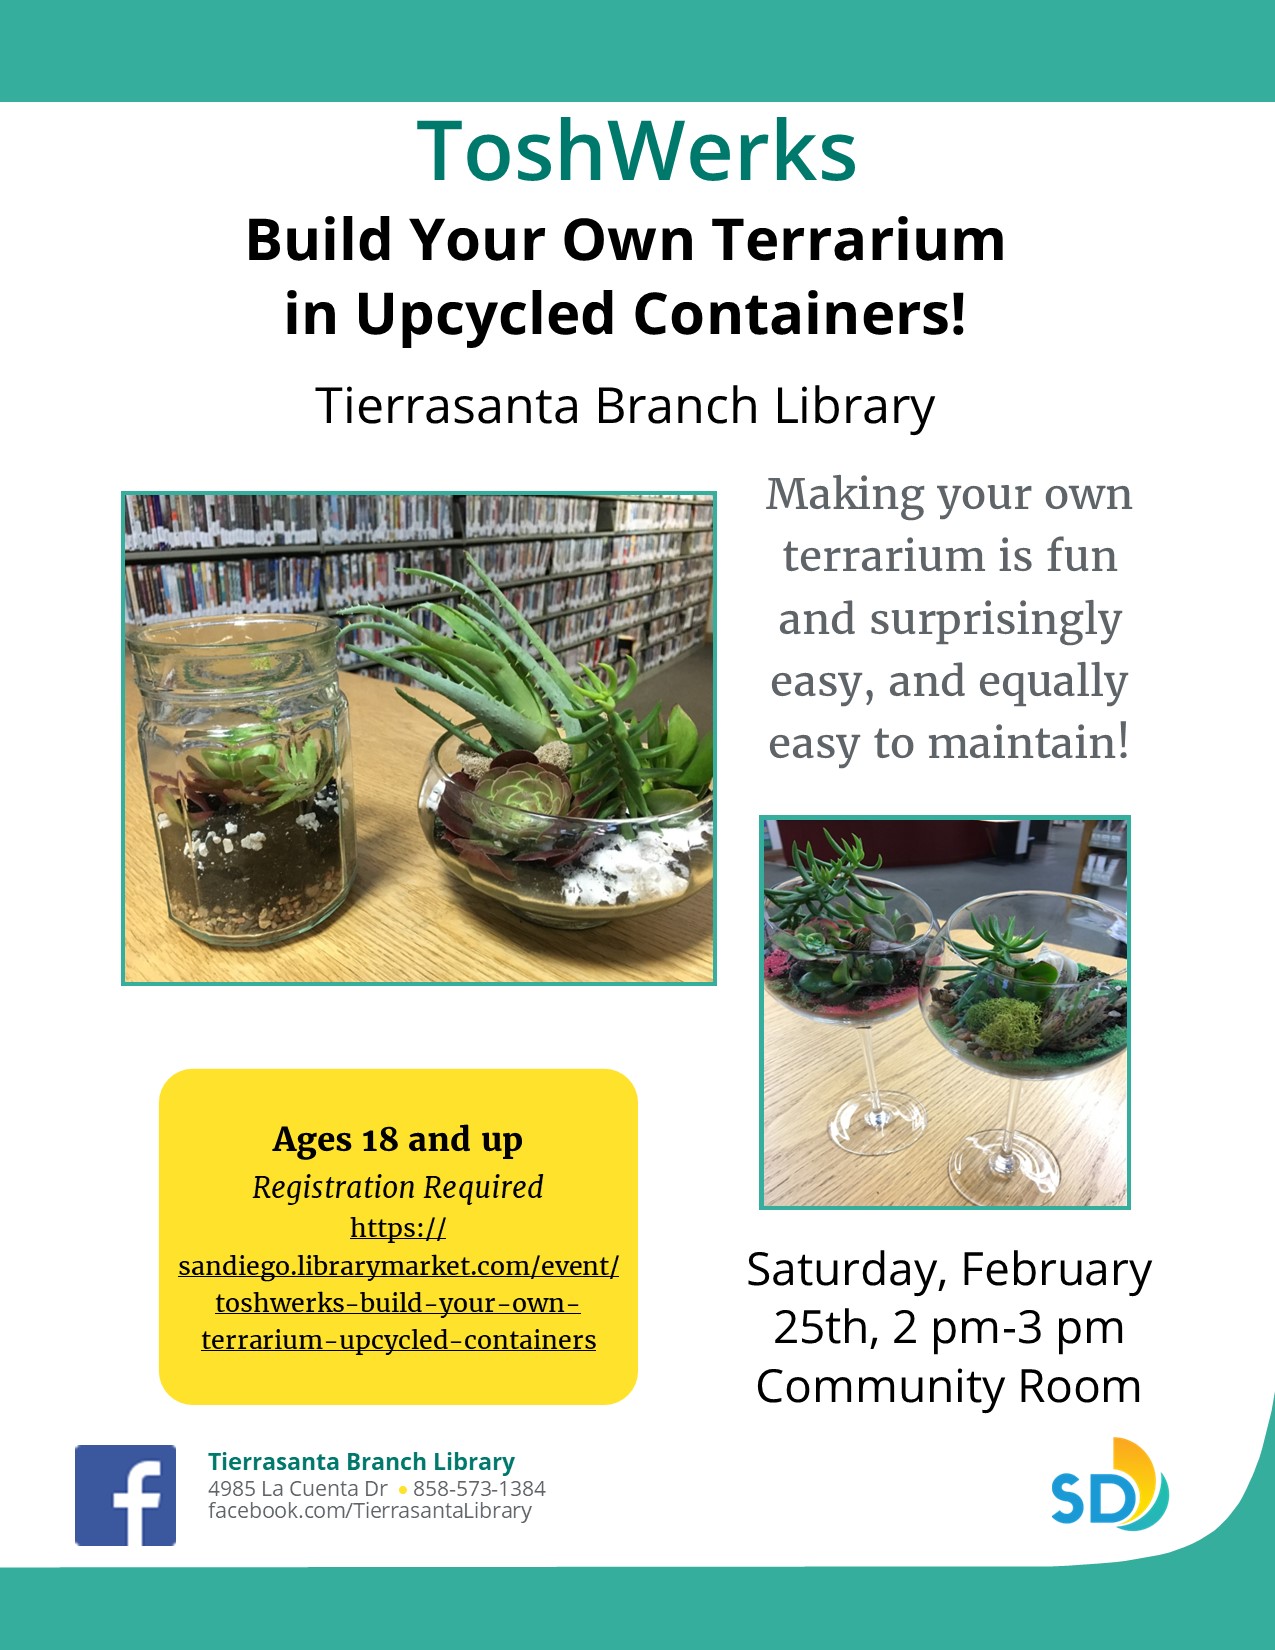 Flyer with images of terrariums in upcycled containers